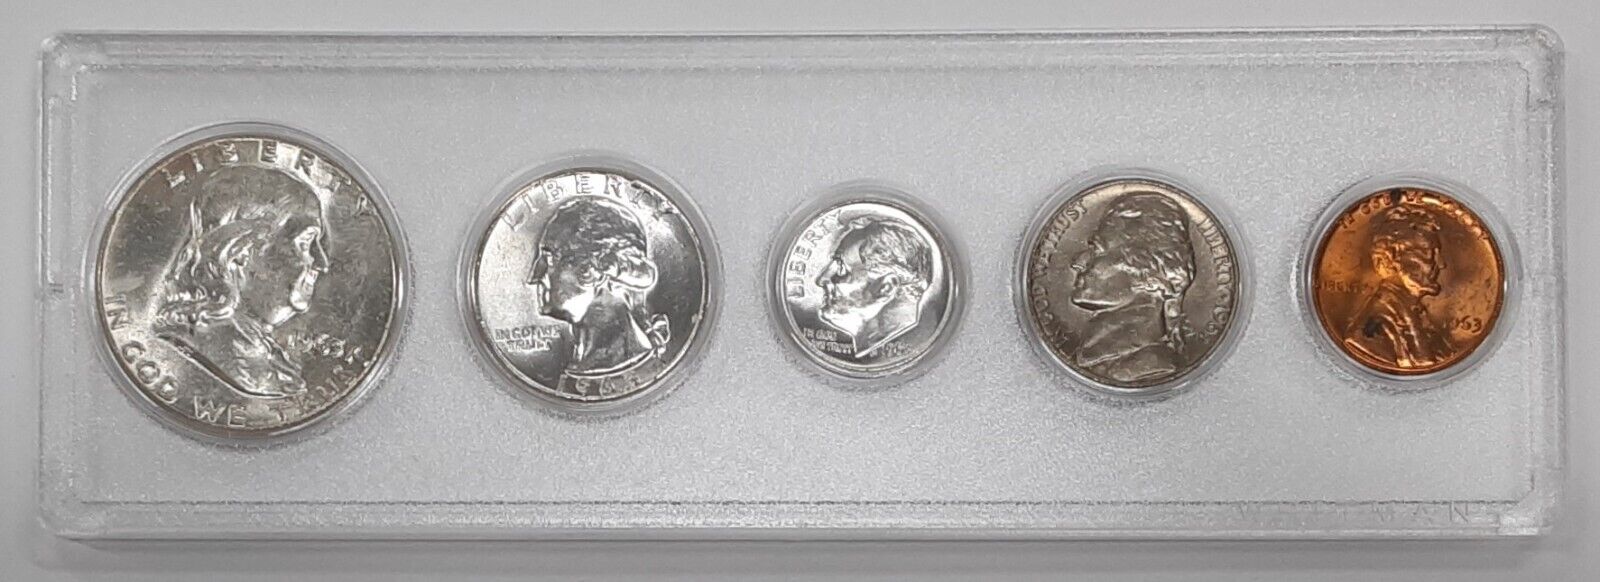 1963 US Uncirculated Year Set with Silver Half Quarter and Dime 5 Coins Total